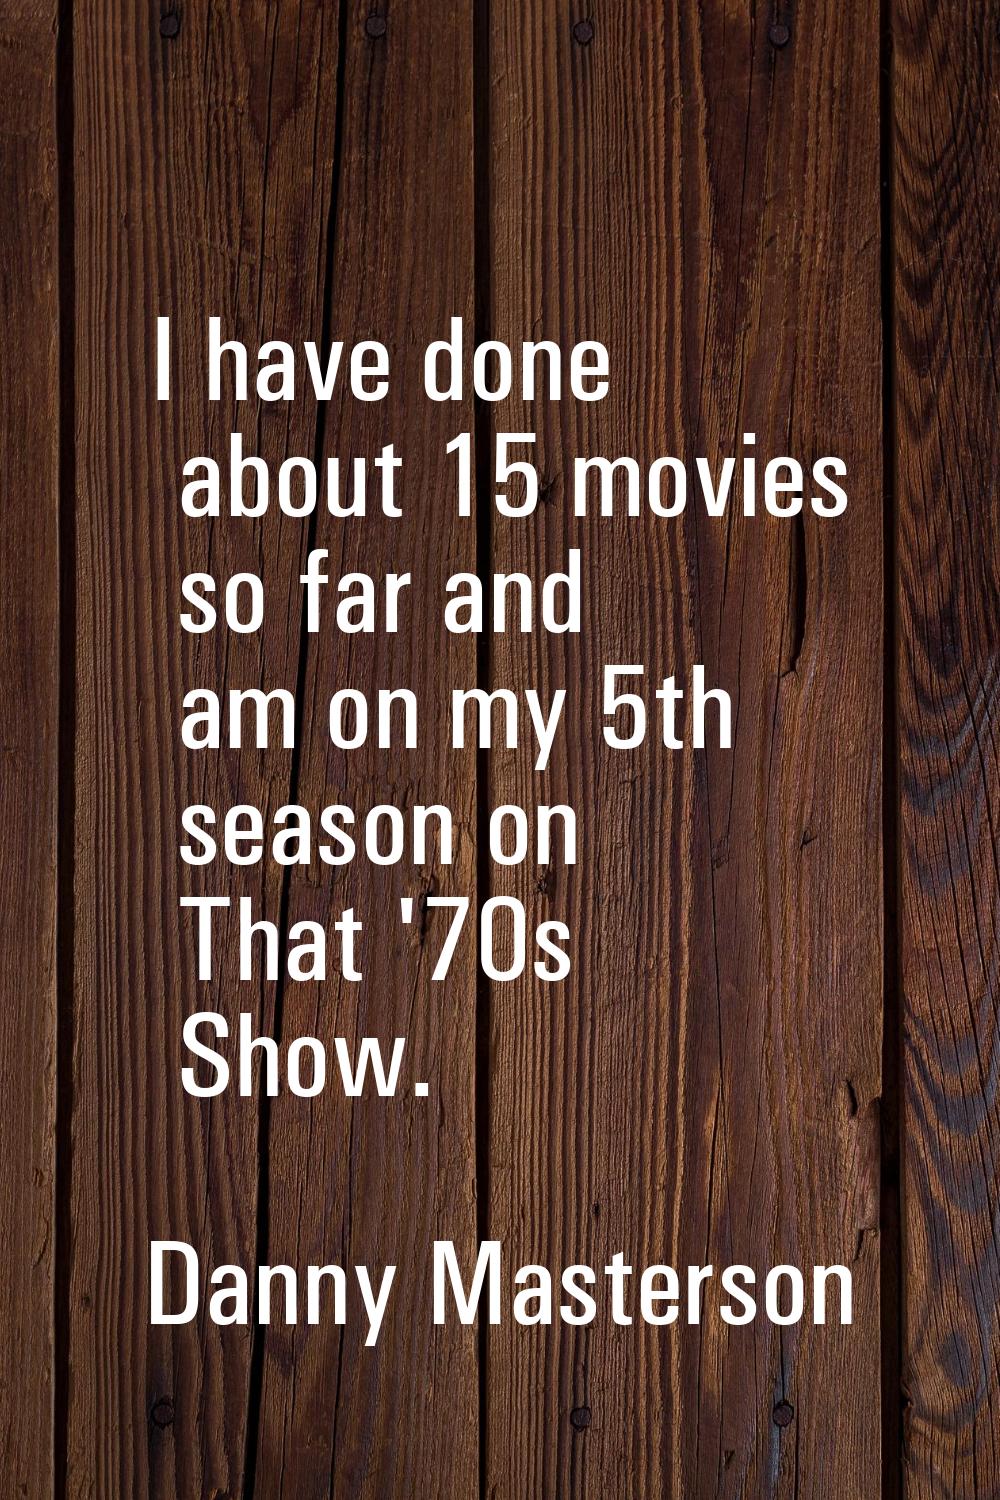 I have done about 15 movies so far and am on my 5th season on That '70s Show.